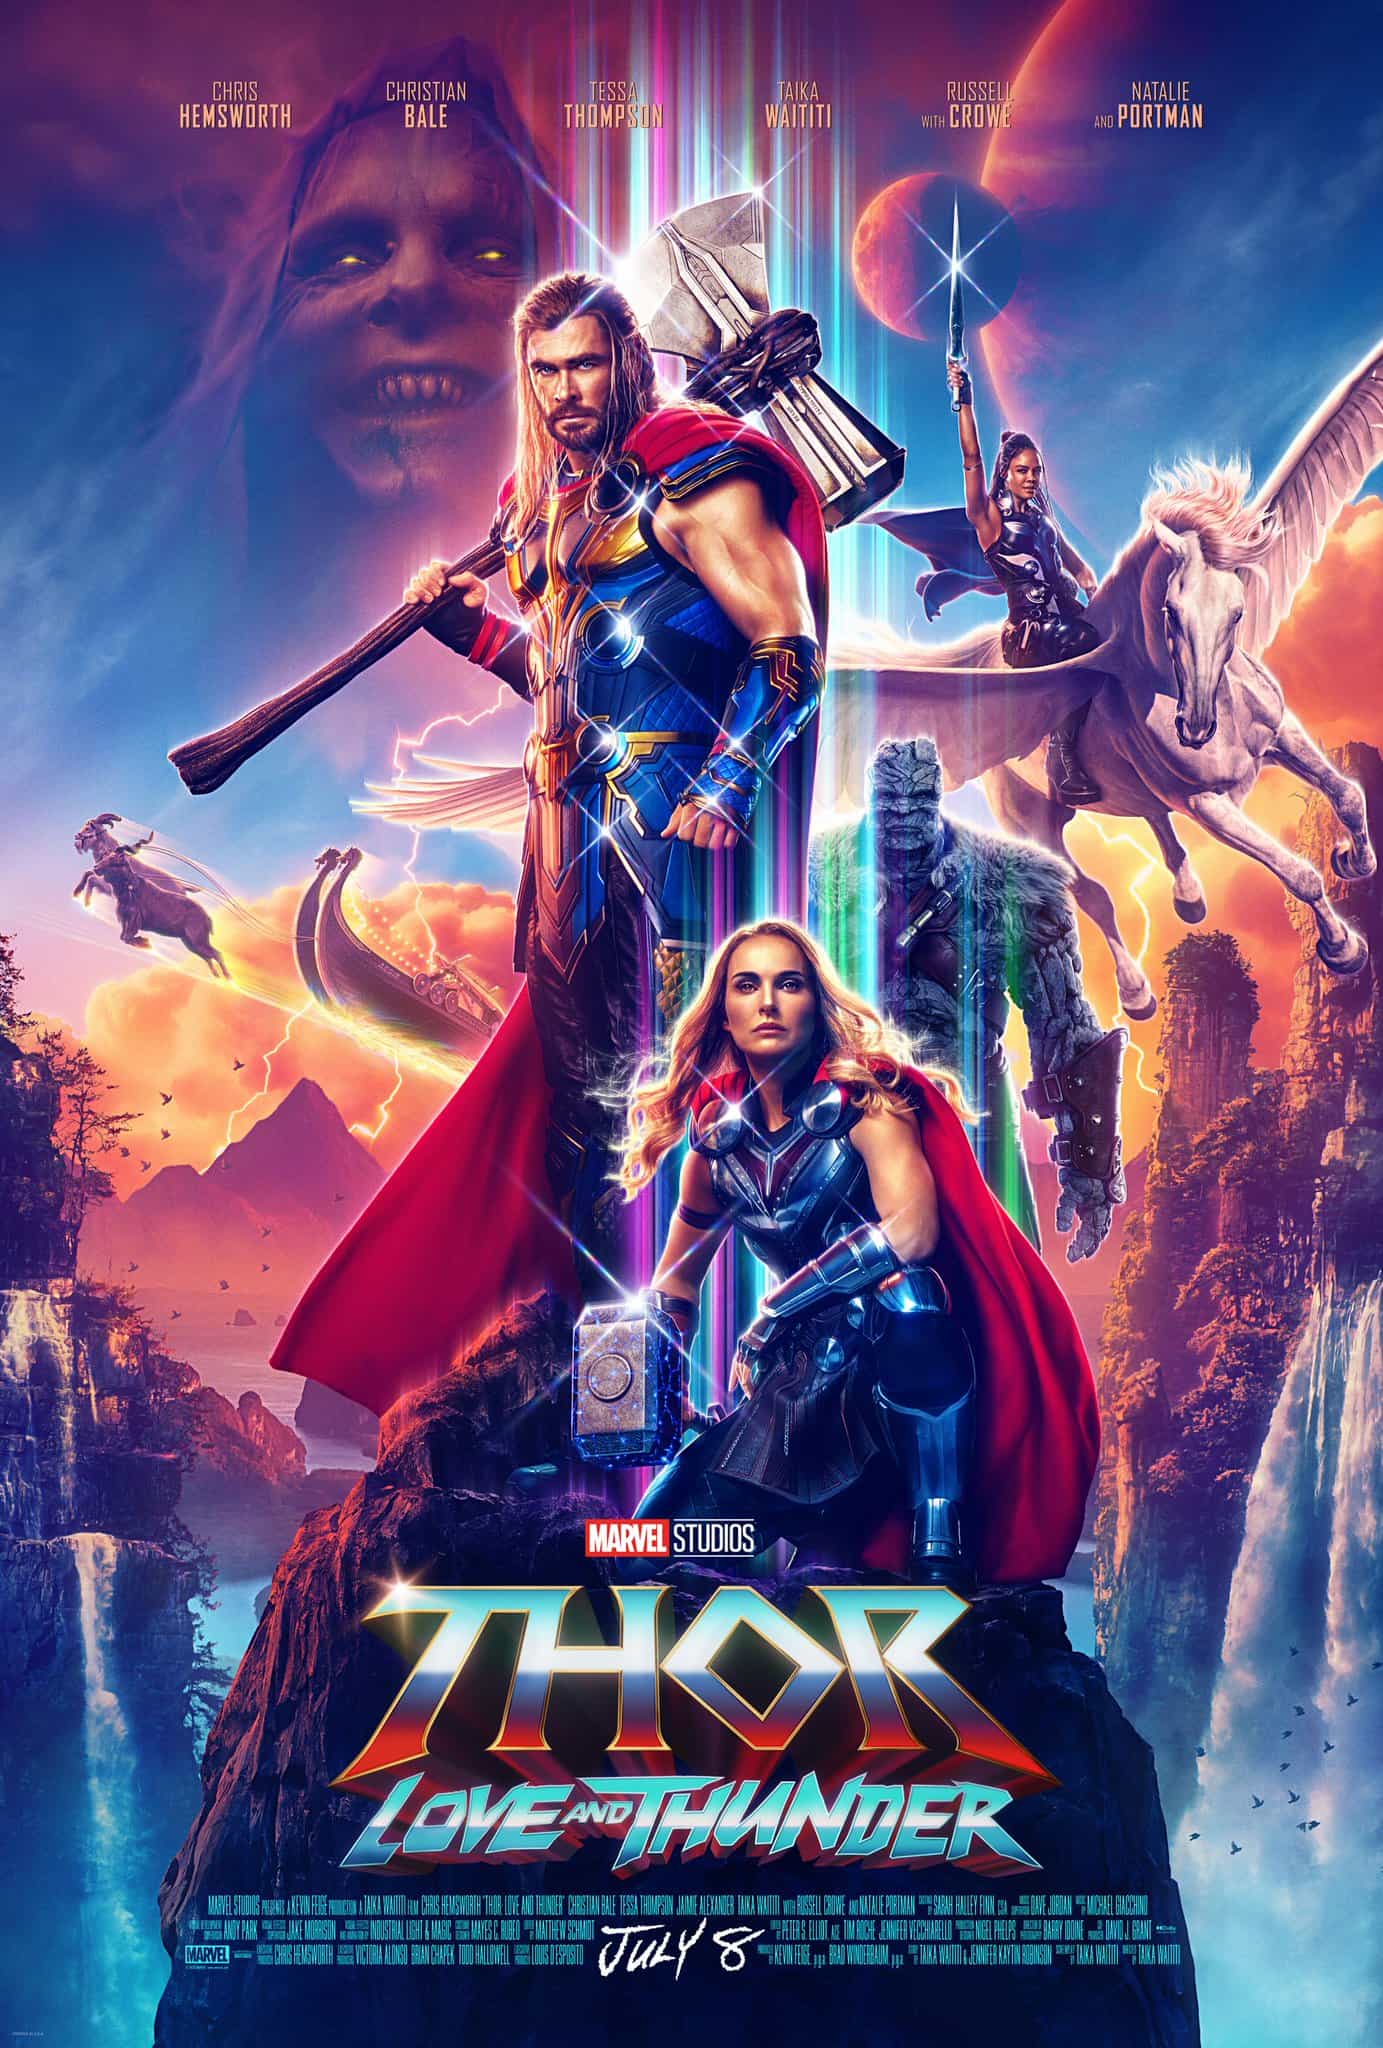 World Box Office Weekend Report 8th - 10th July 2022: Thor: Love and Thunder is the top global movie on its debut with over $300 Million